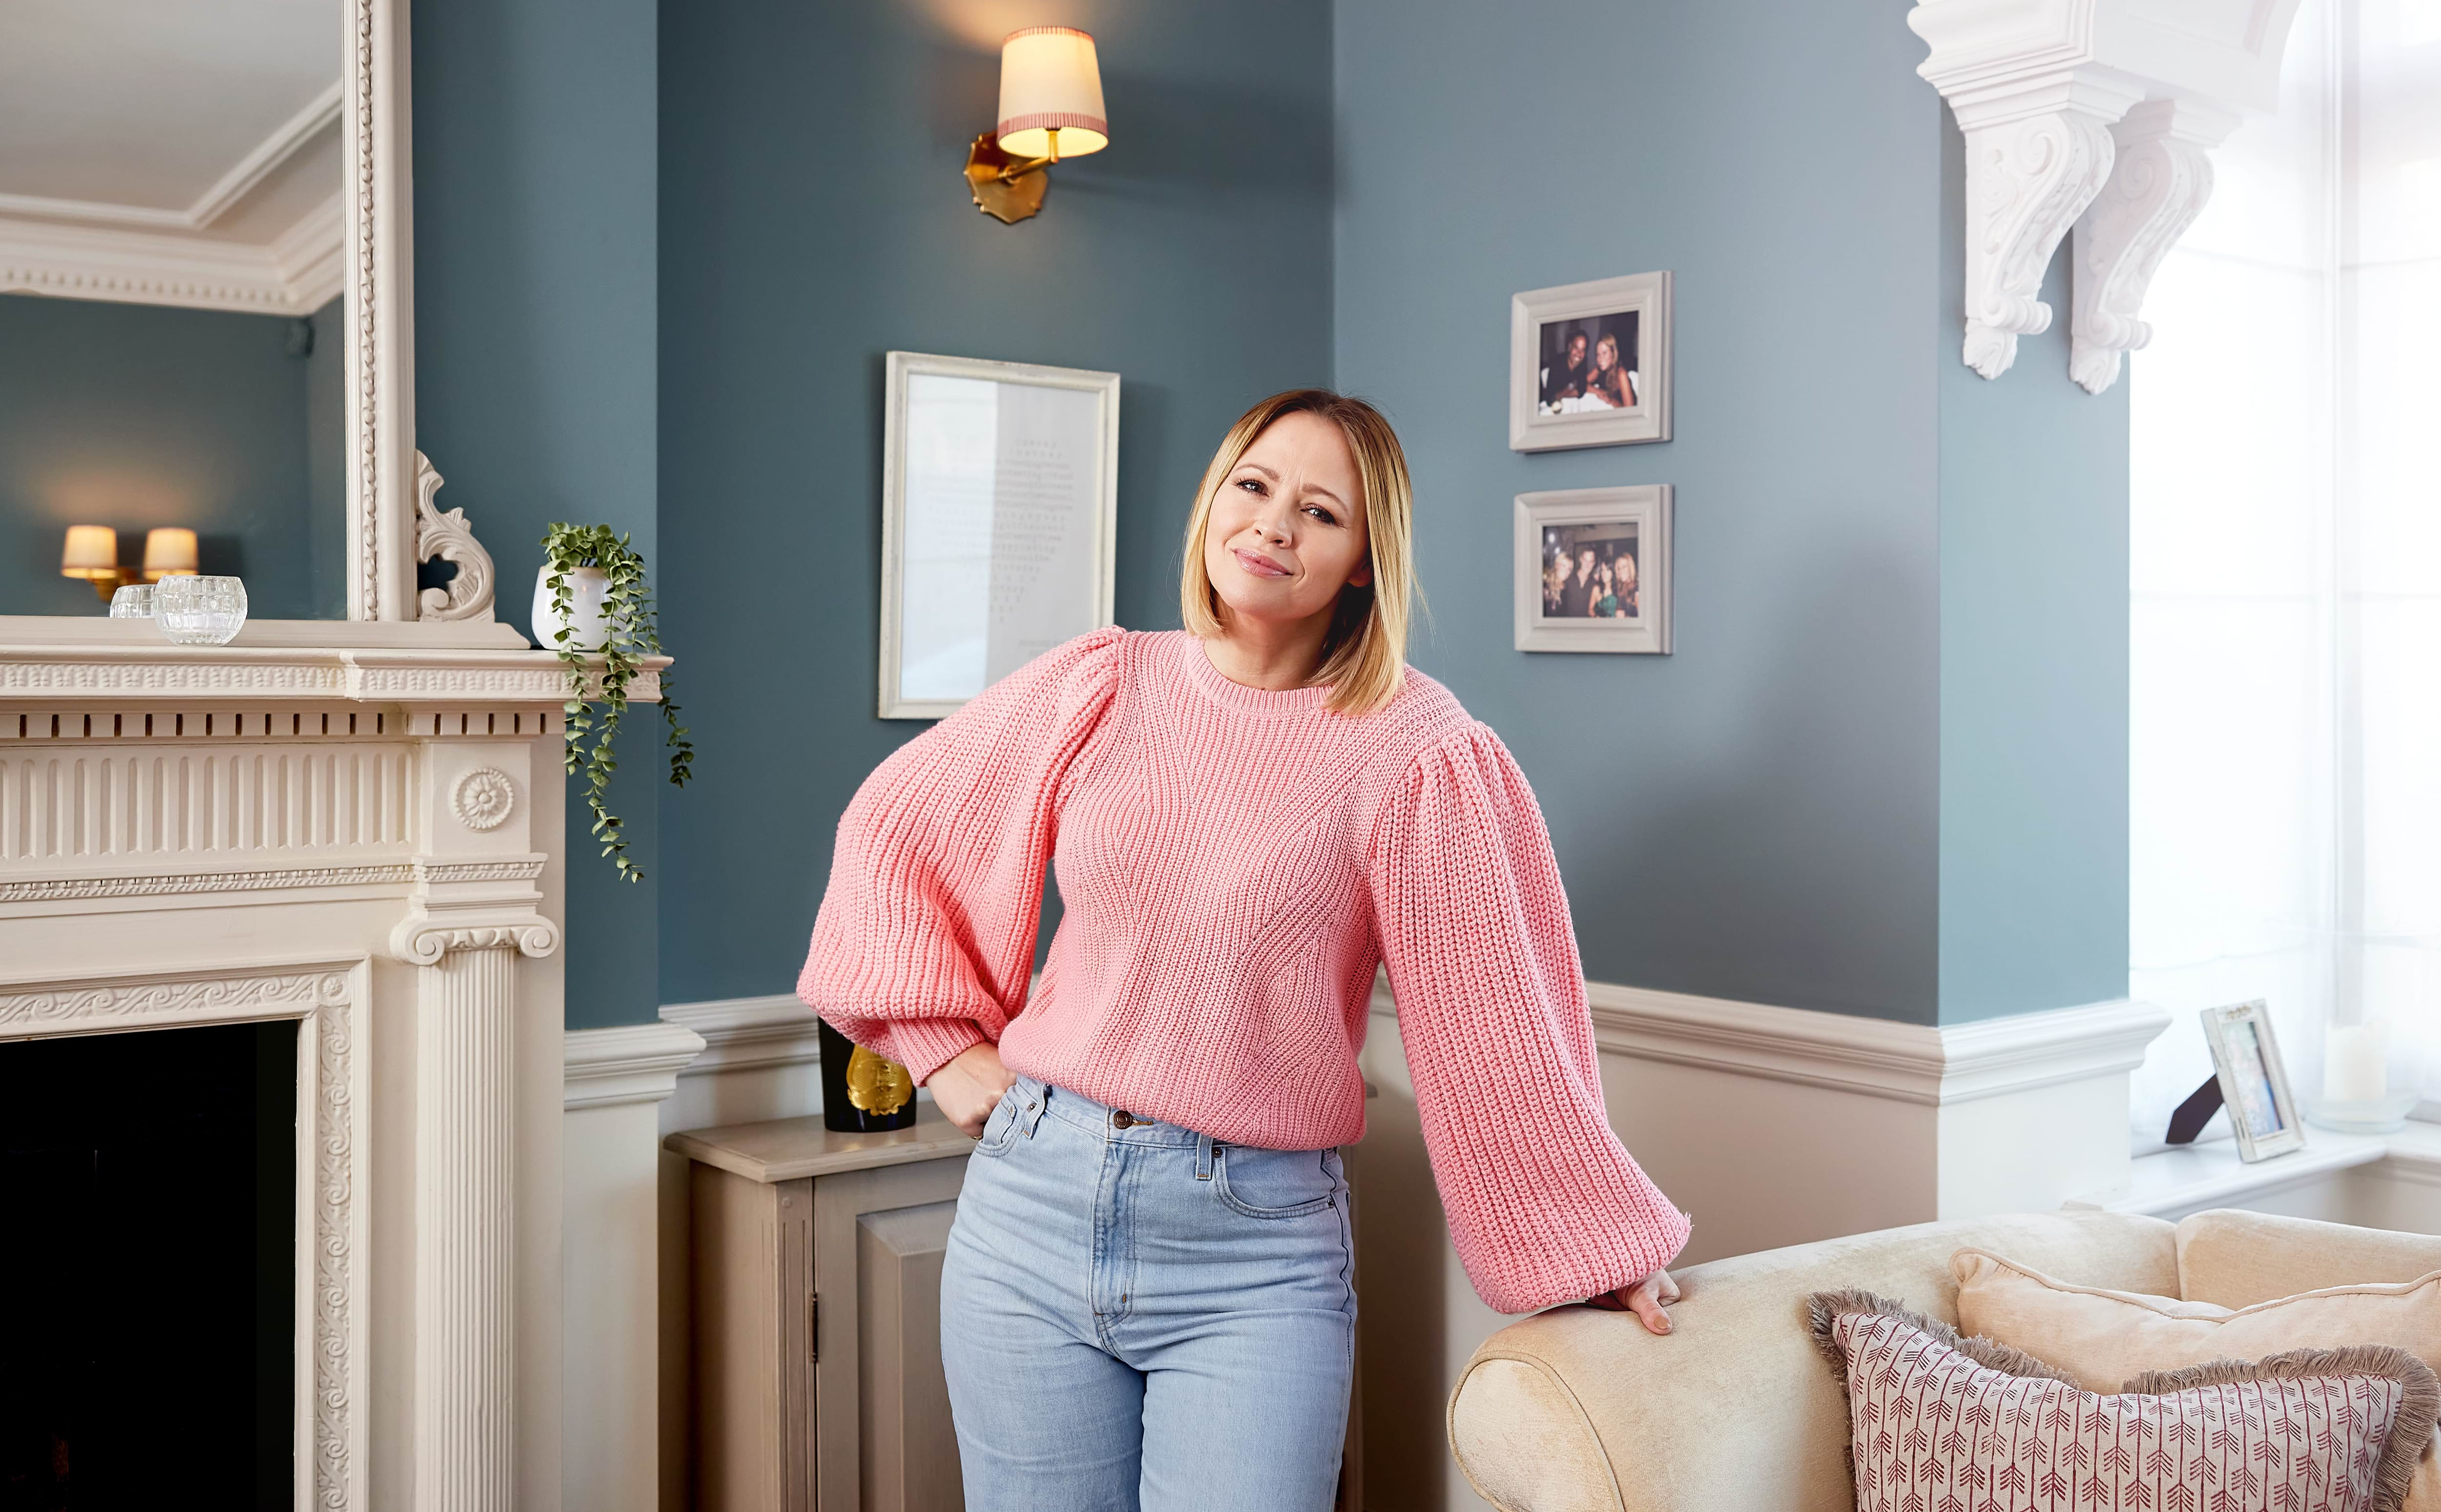 Clarion Launches New Wickes Paint Partnership With Kimberley Walsh